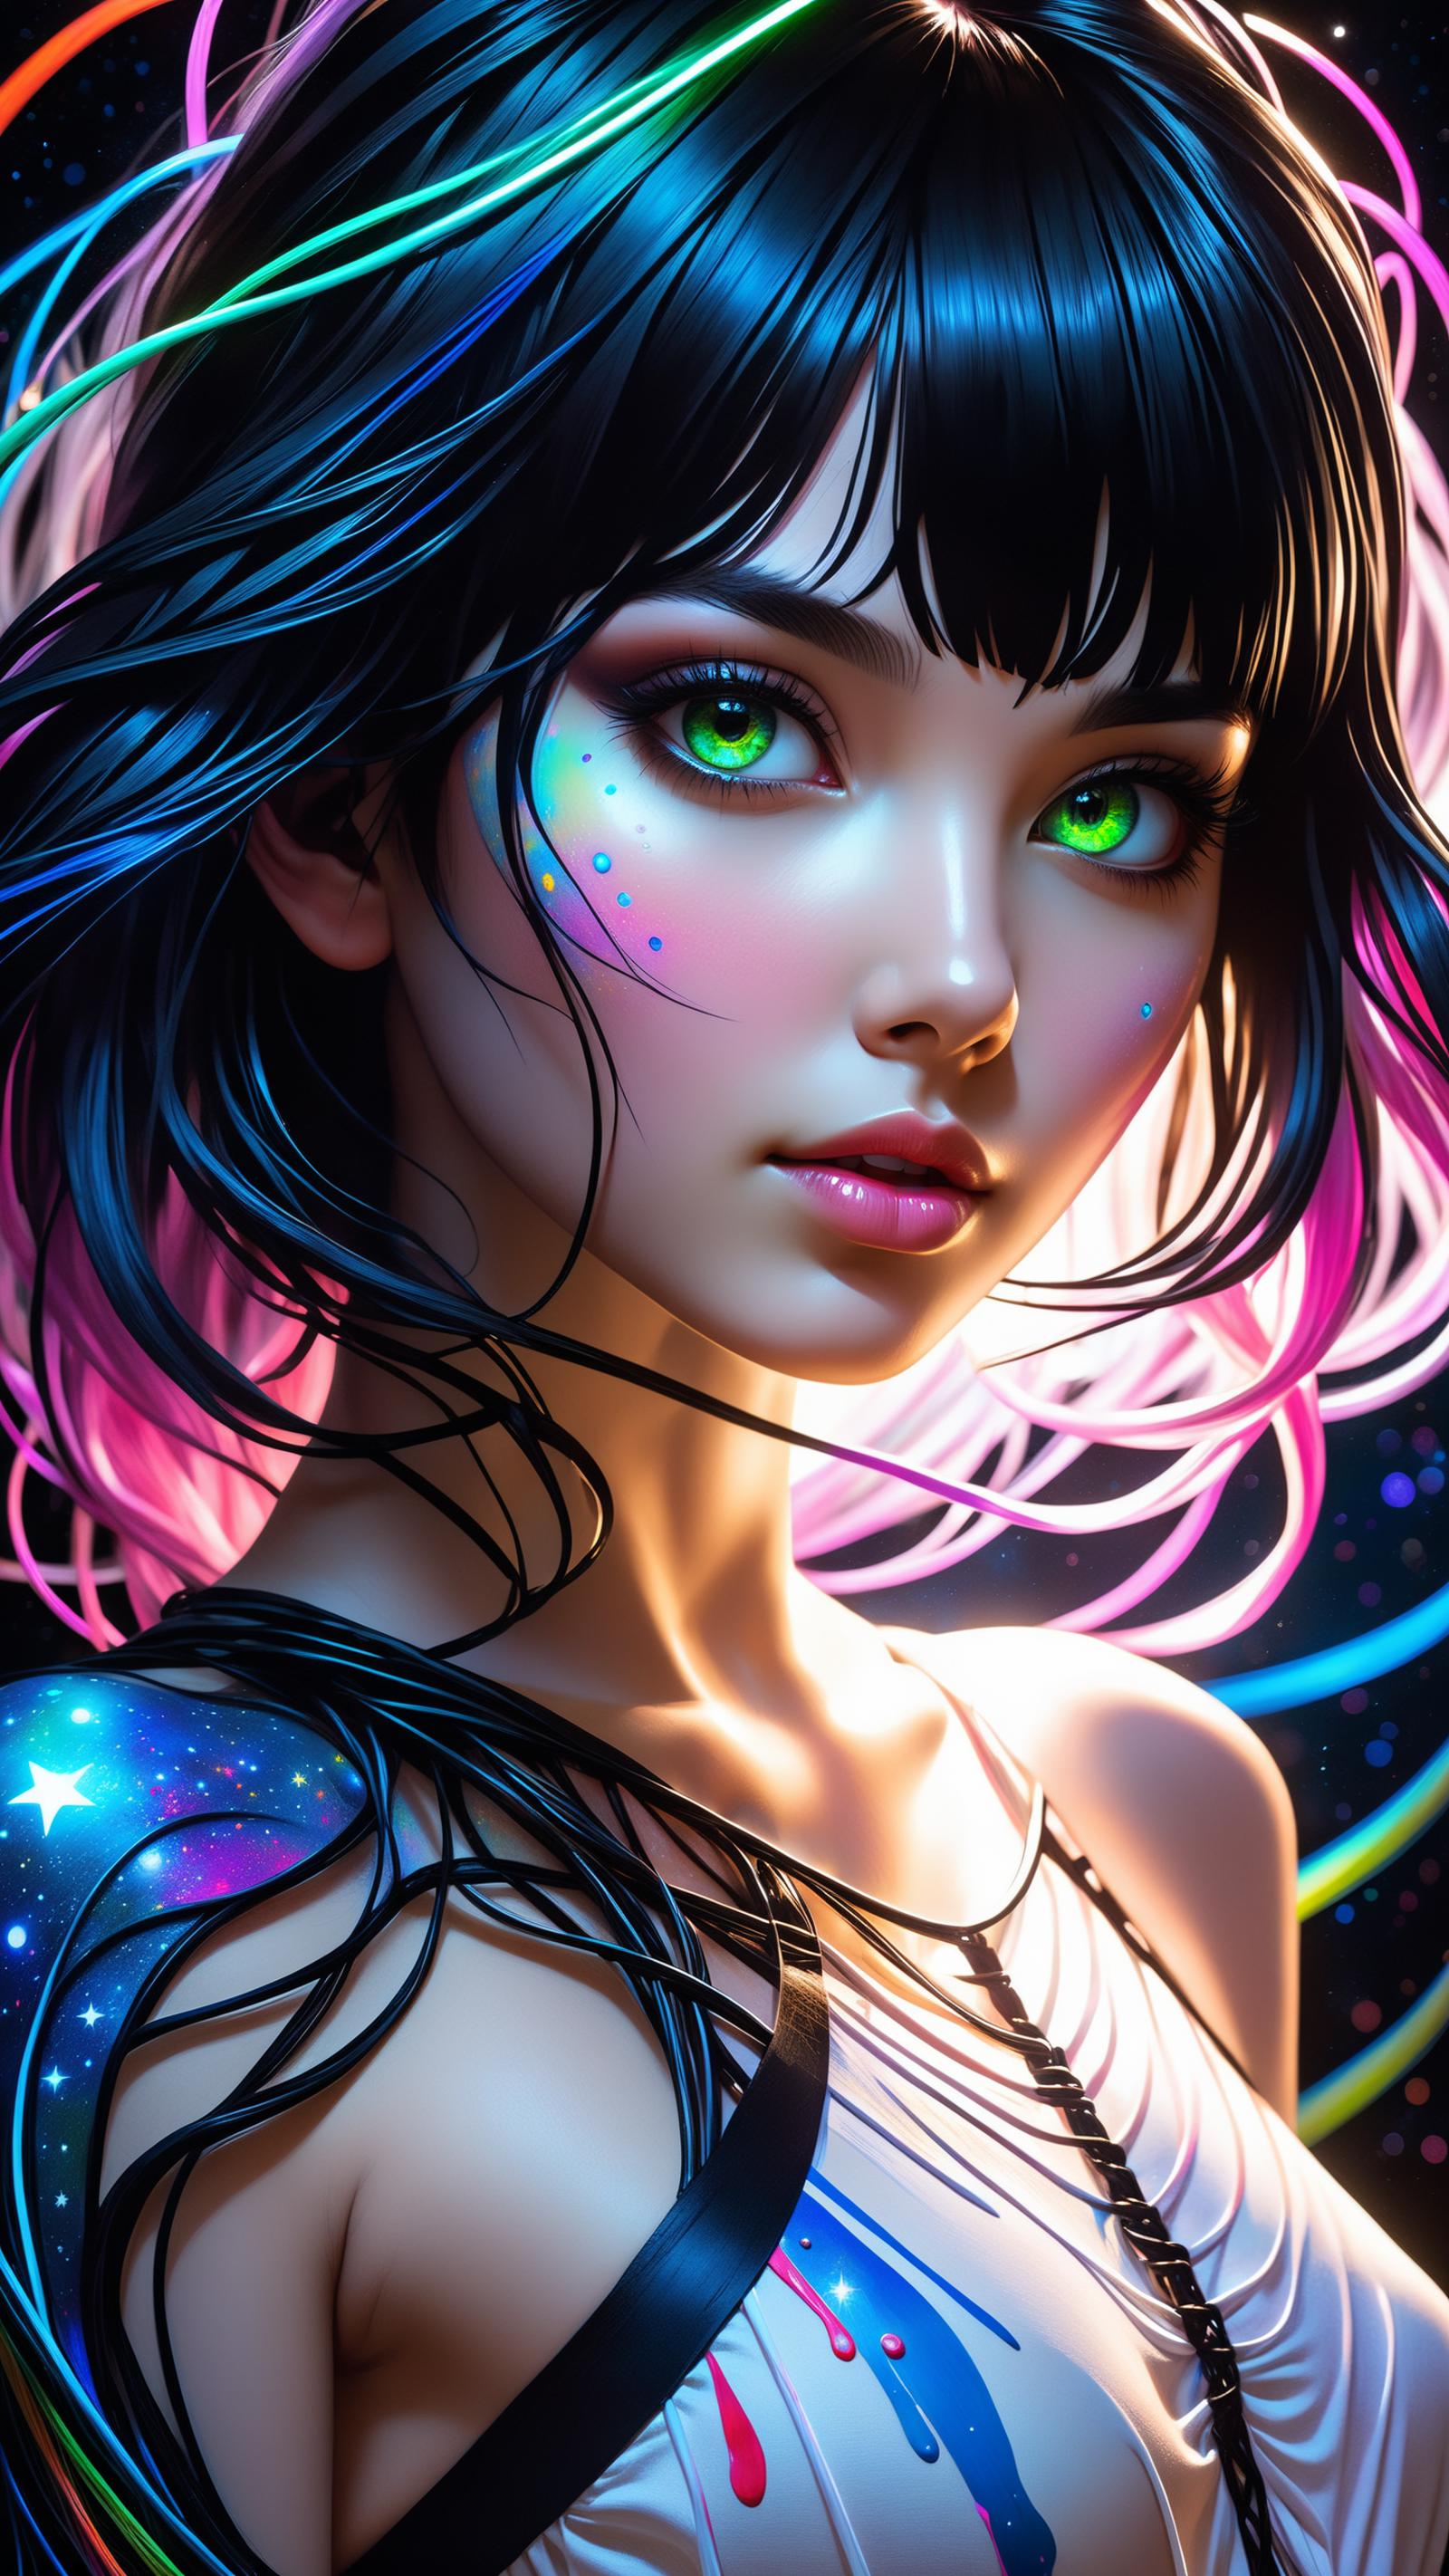 Artistic digital painting of a girl with green eyes and a colorful background.